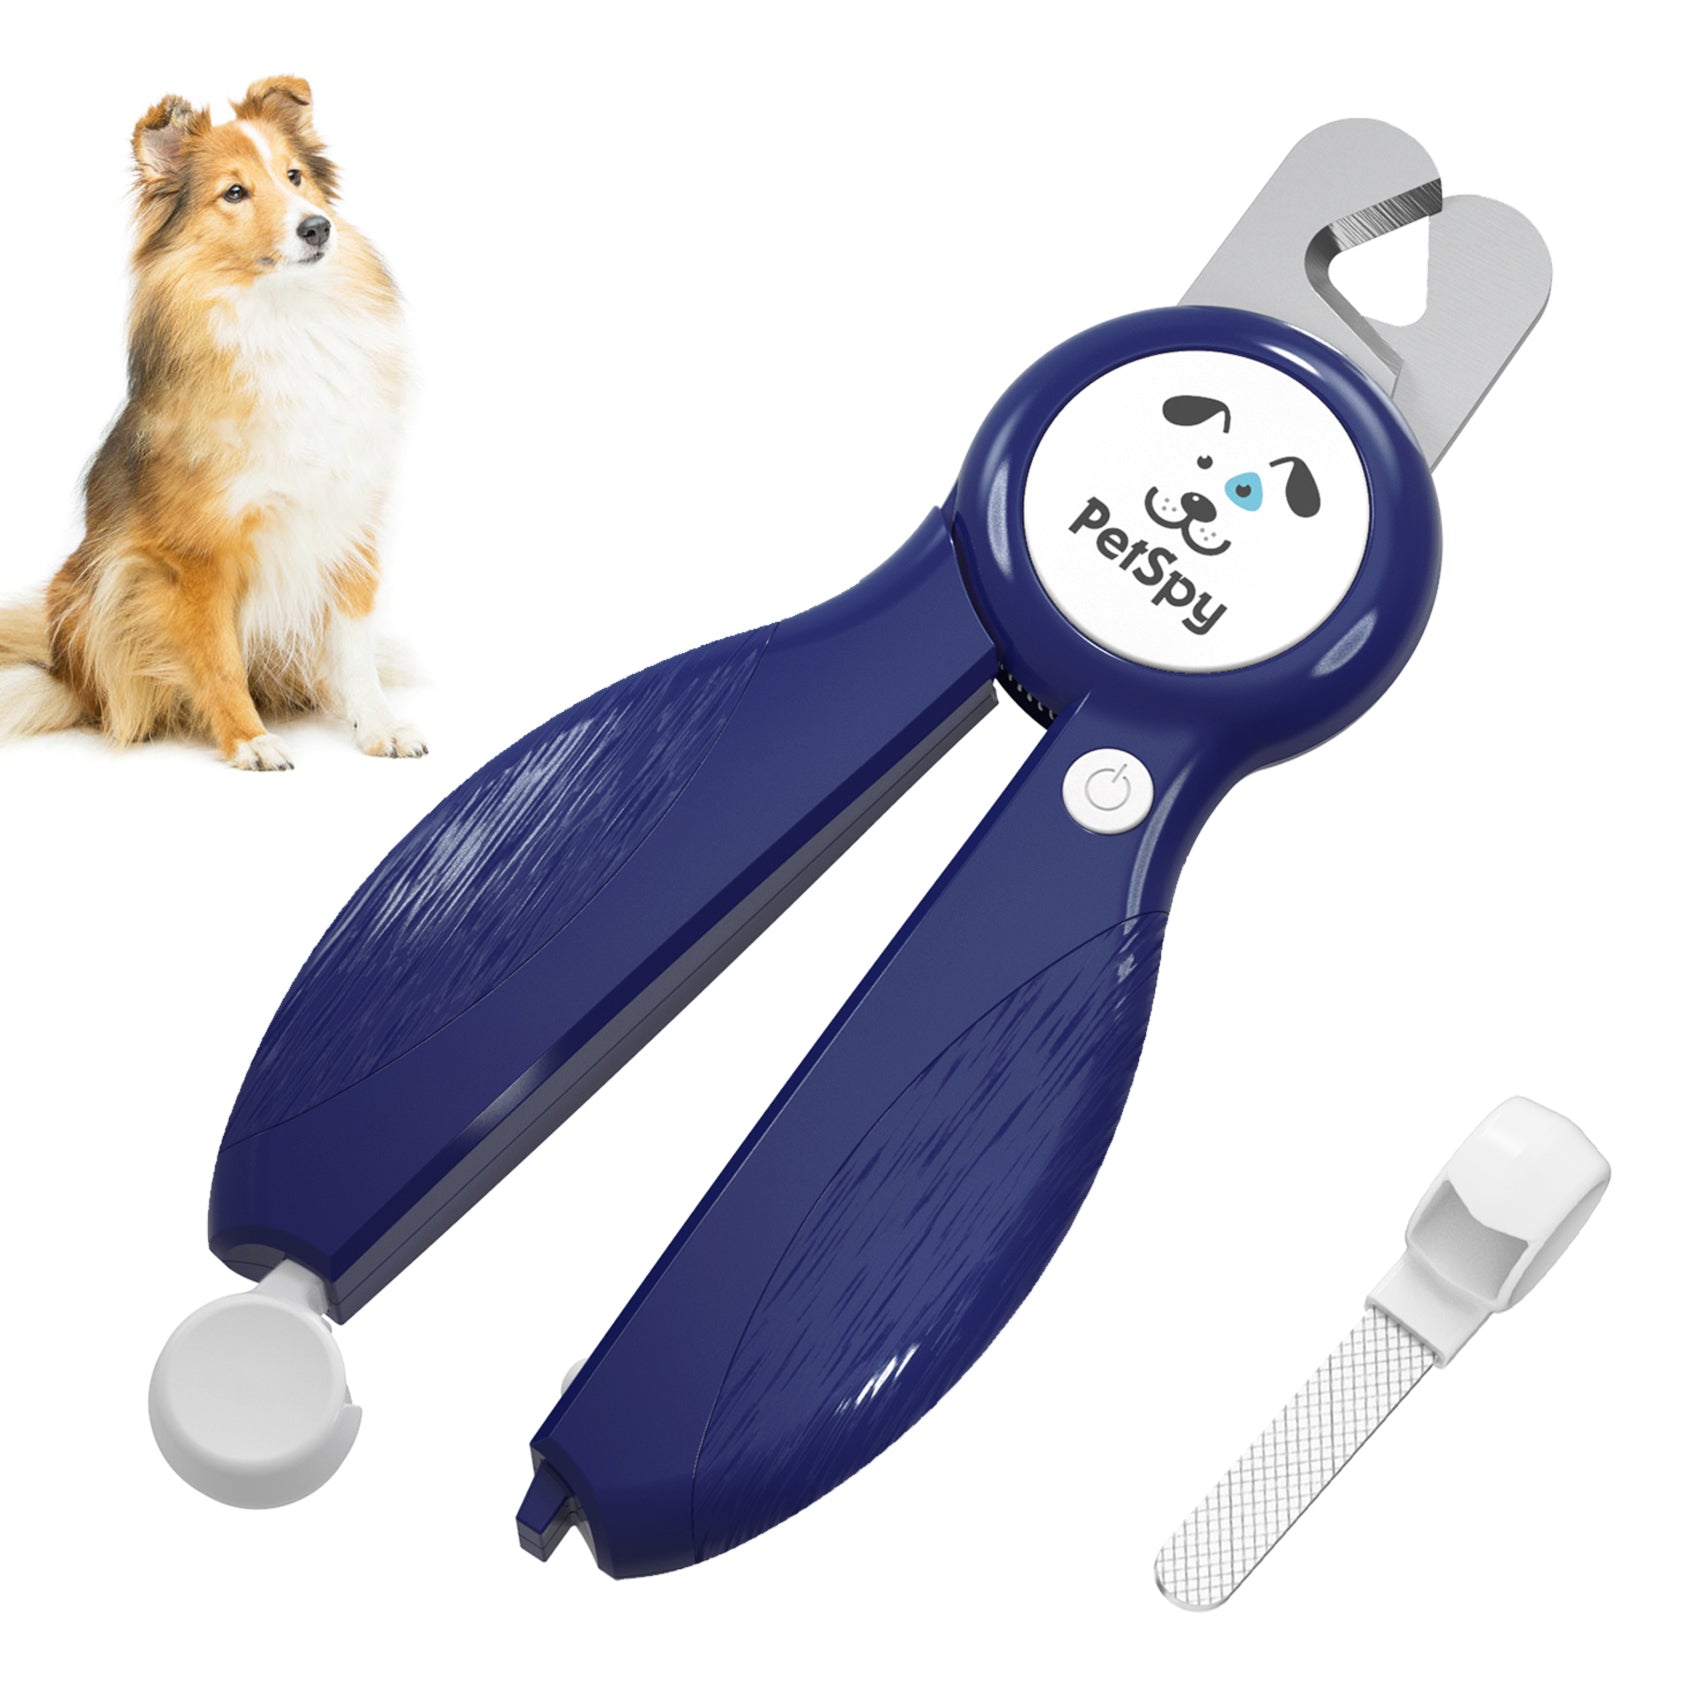 Aiitle Pet Nail Clippers with Detachable LED Light – AIITLE